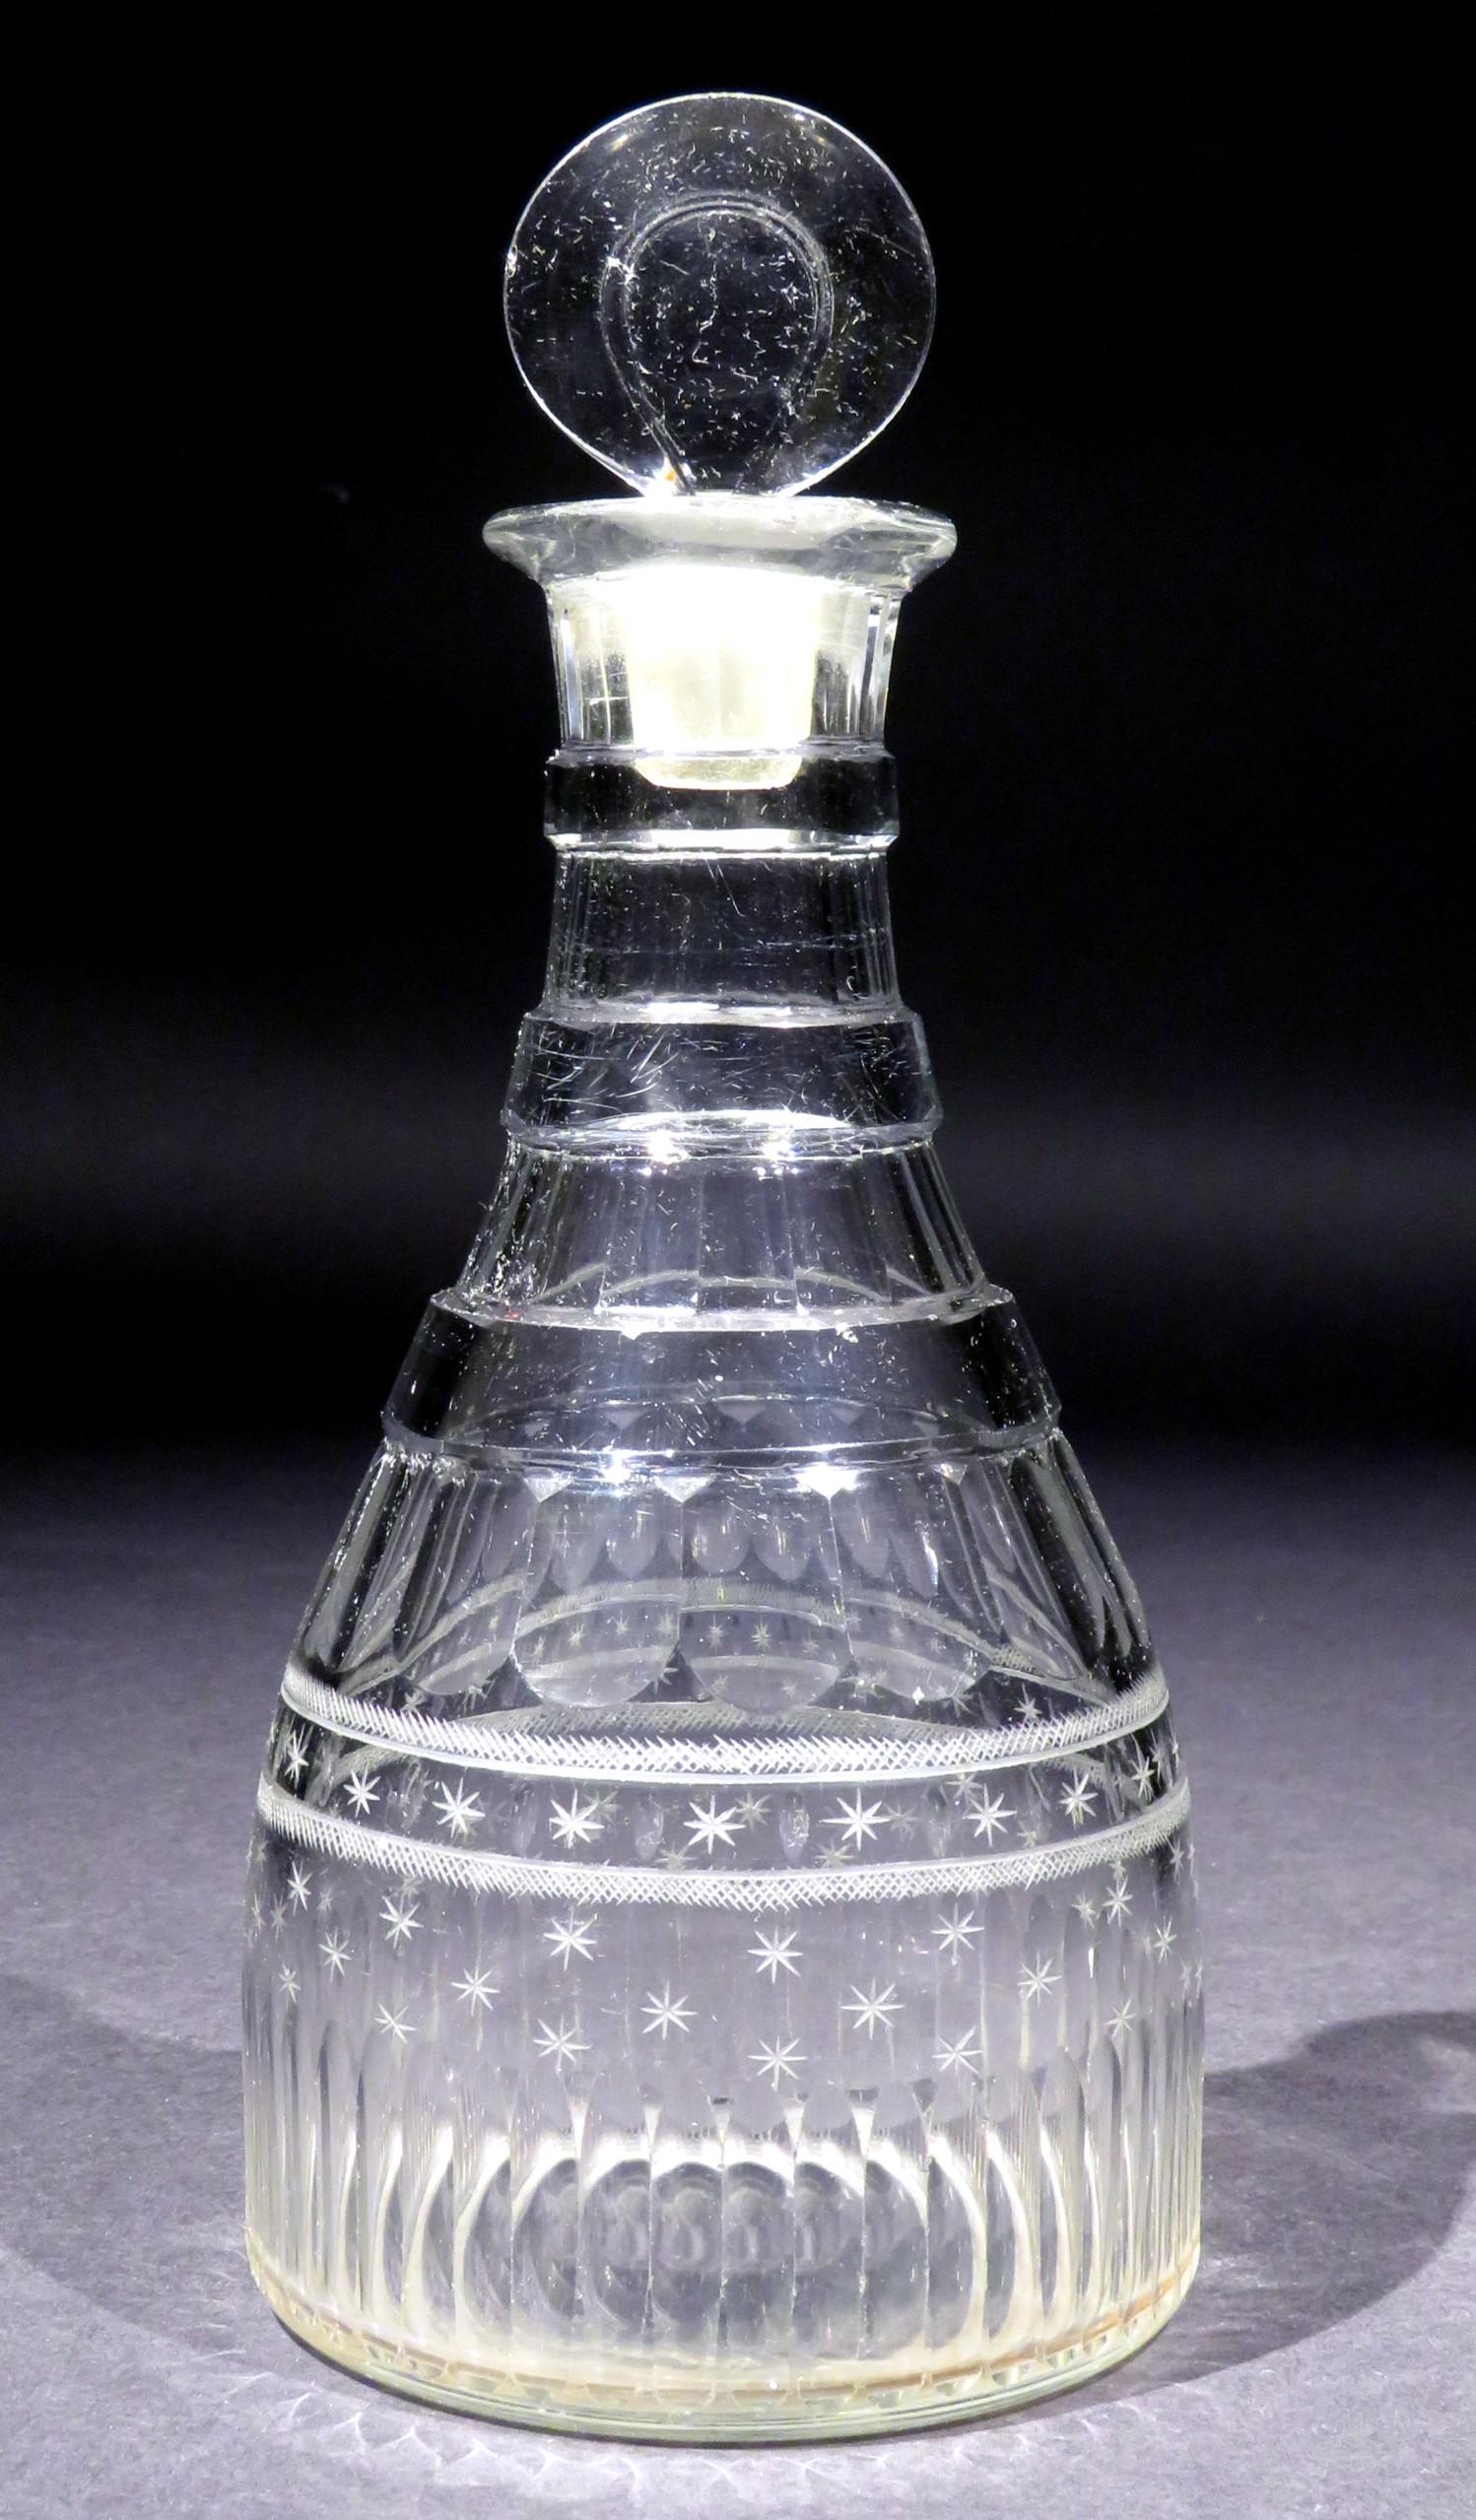 A very handsome Georgian Anglo Irish cut glass decanter, showing a base decorated with comb flutes & start cut motifs, rising to a neck decorated with three flat neck rings & basal flutes, ascending to it’s original target stopper.
The underside